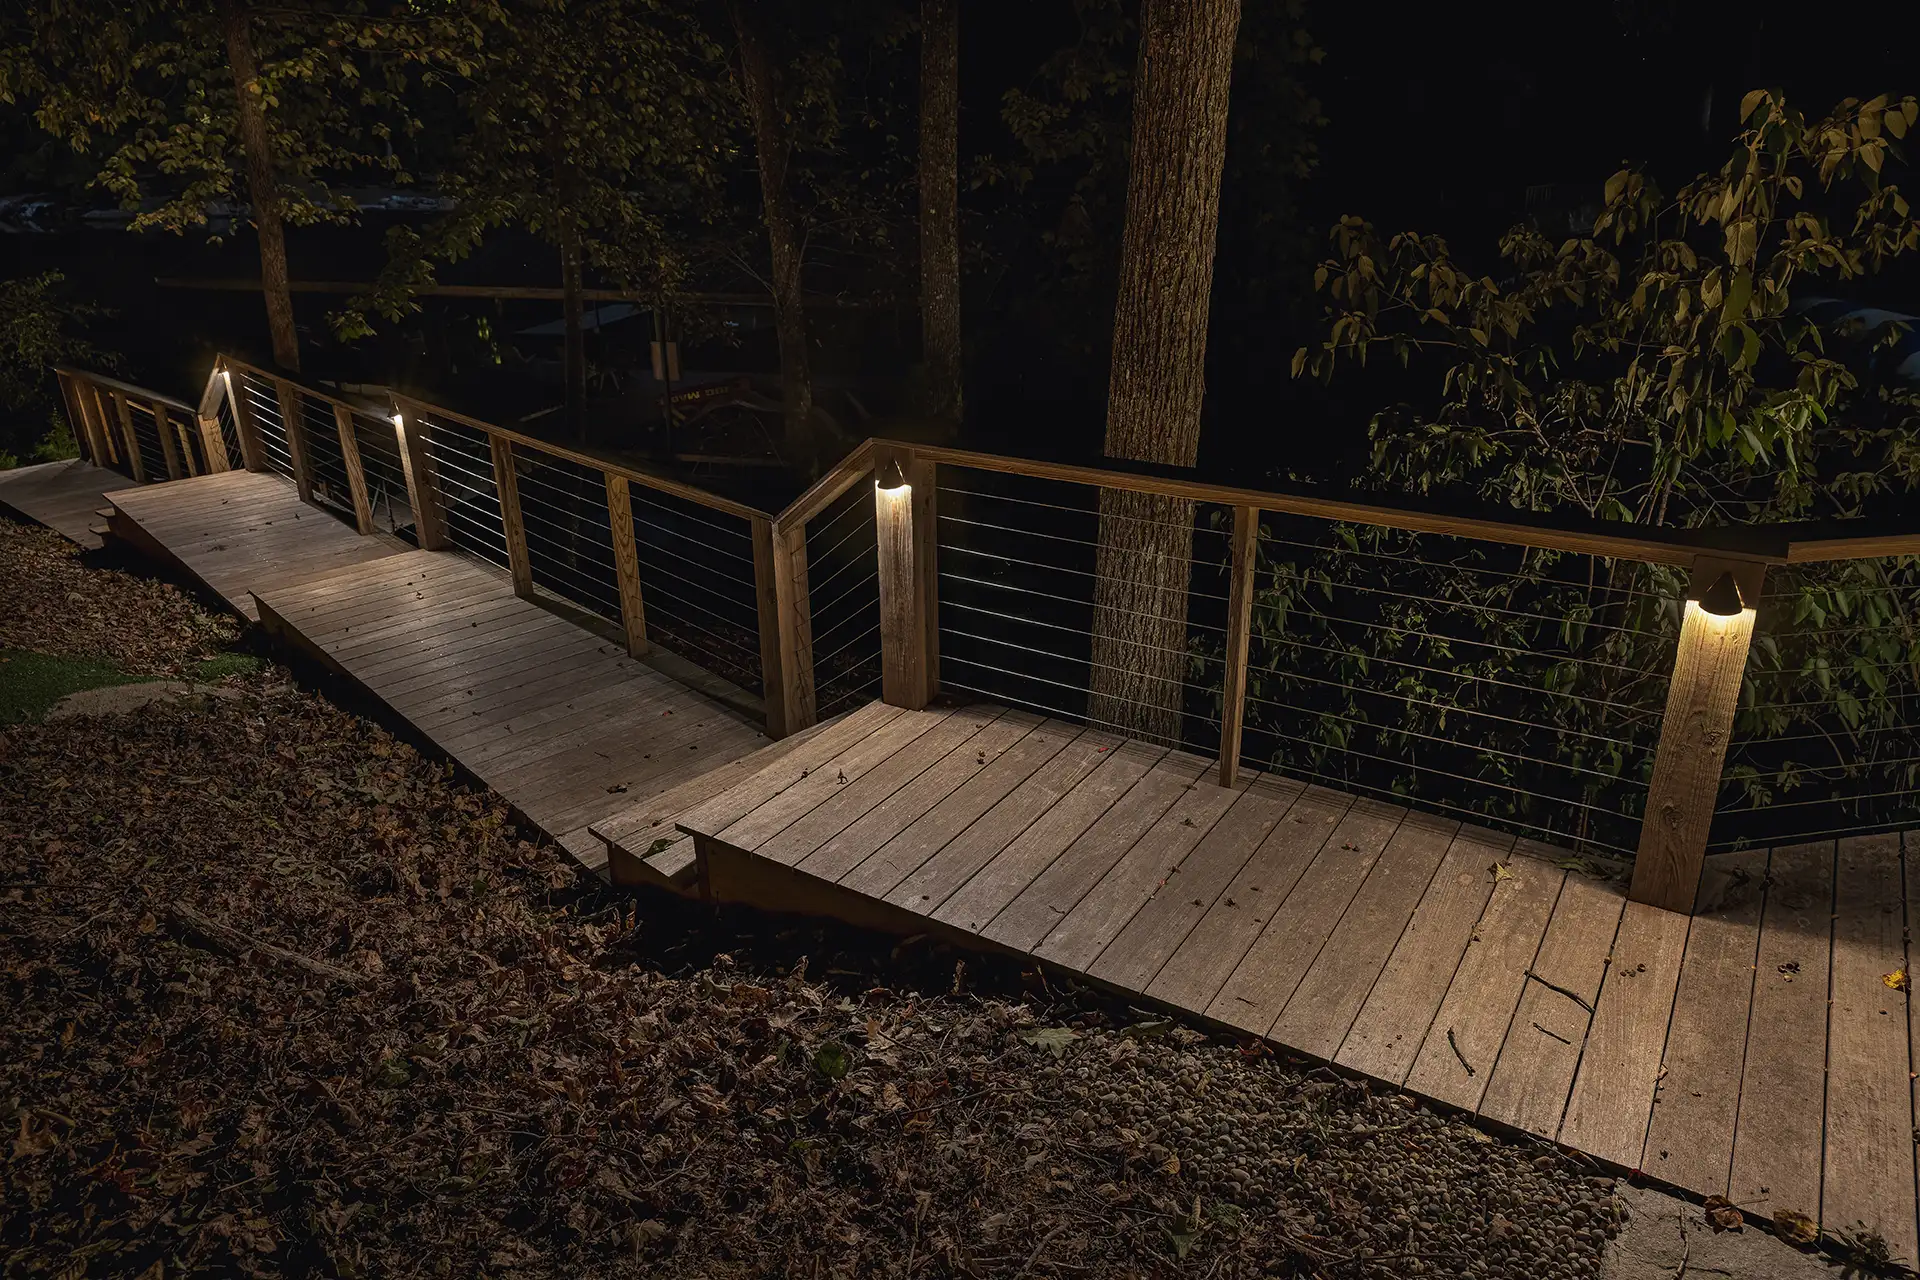 Killarney Rd image 8 deck post path Lighthouse Outdoor Lighting and Audio Knoxville TN